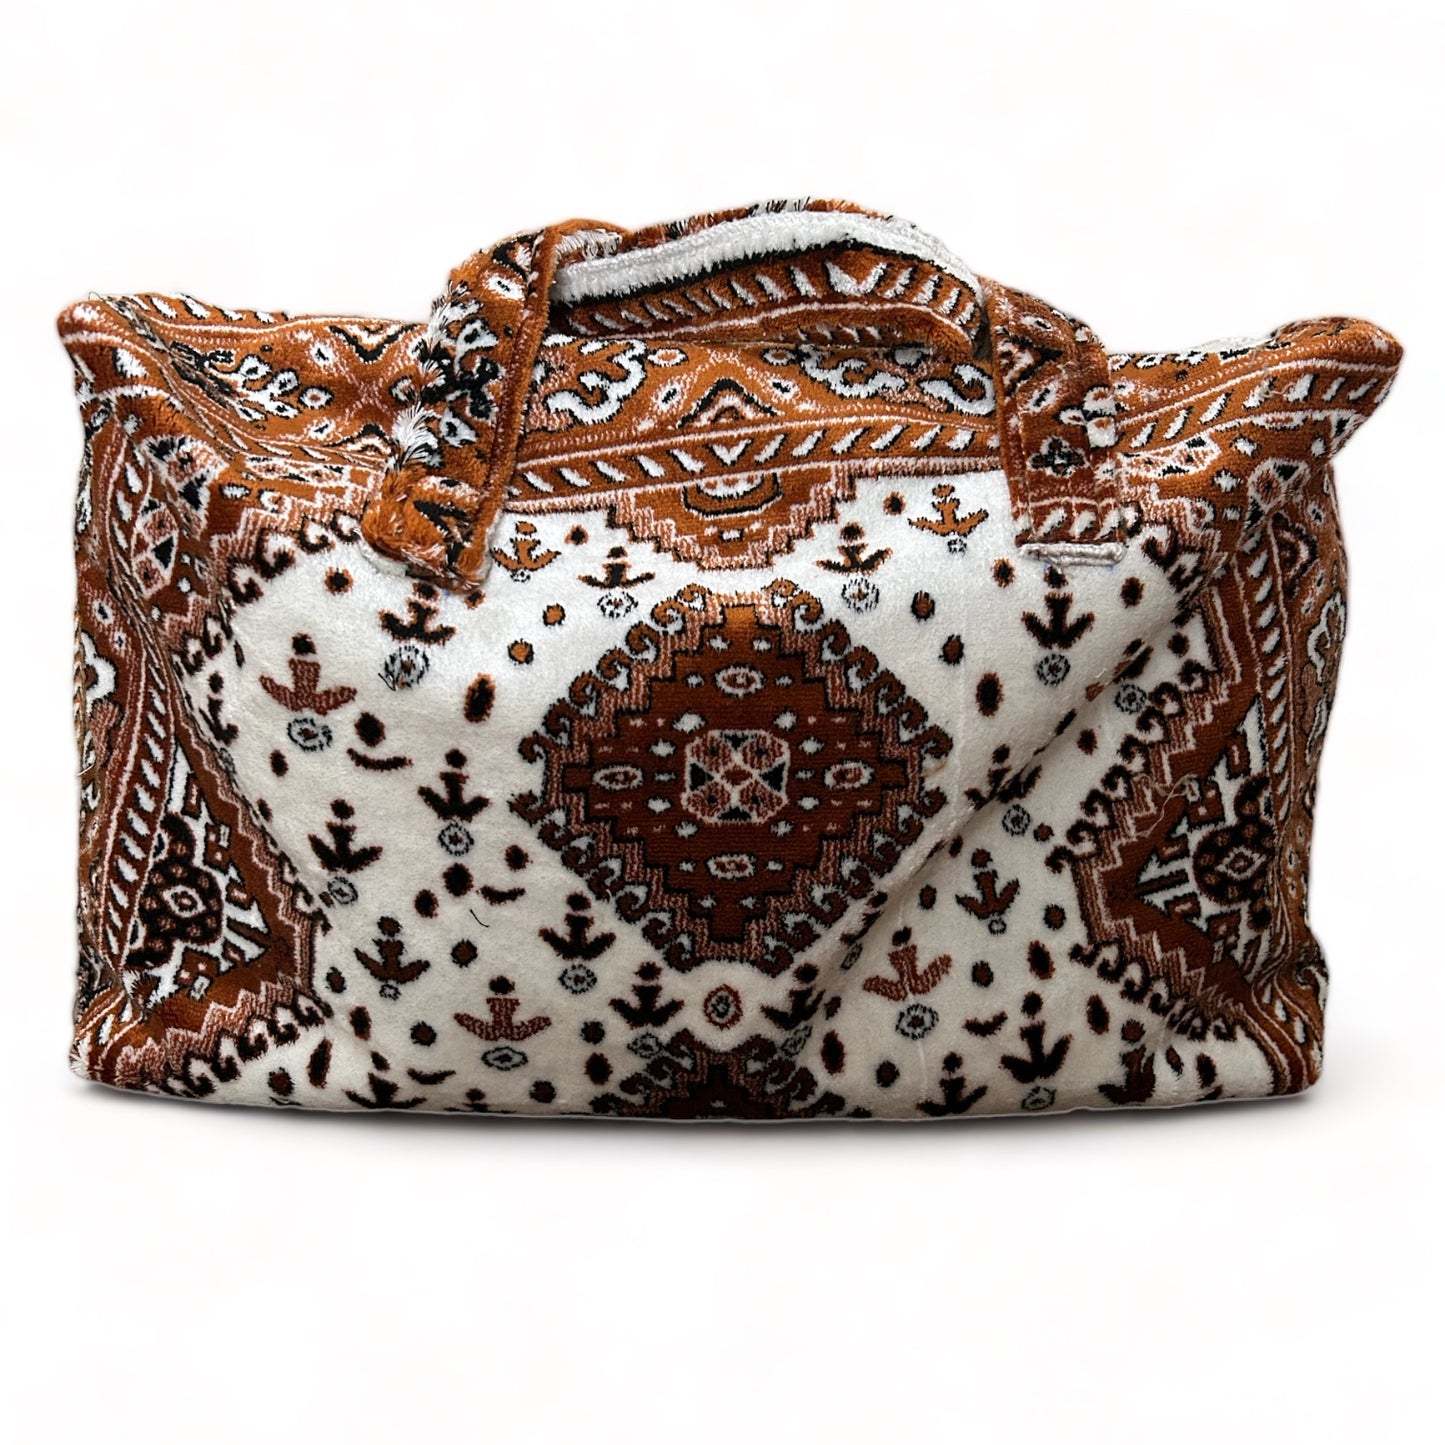 Weekend bag made of carpet fabric in rust color with white